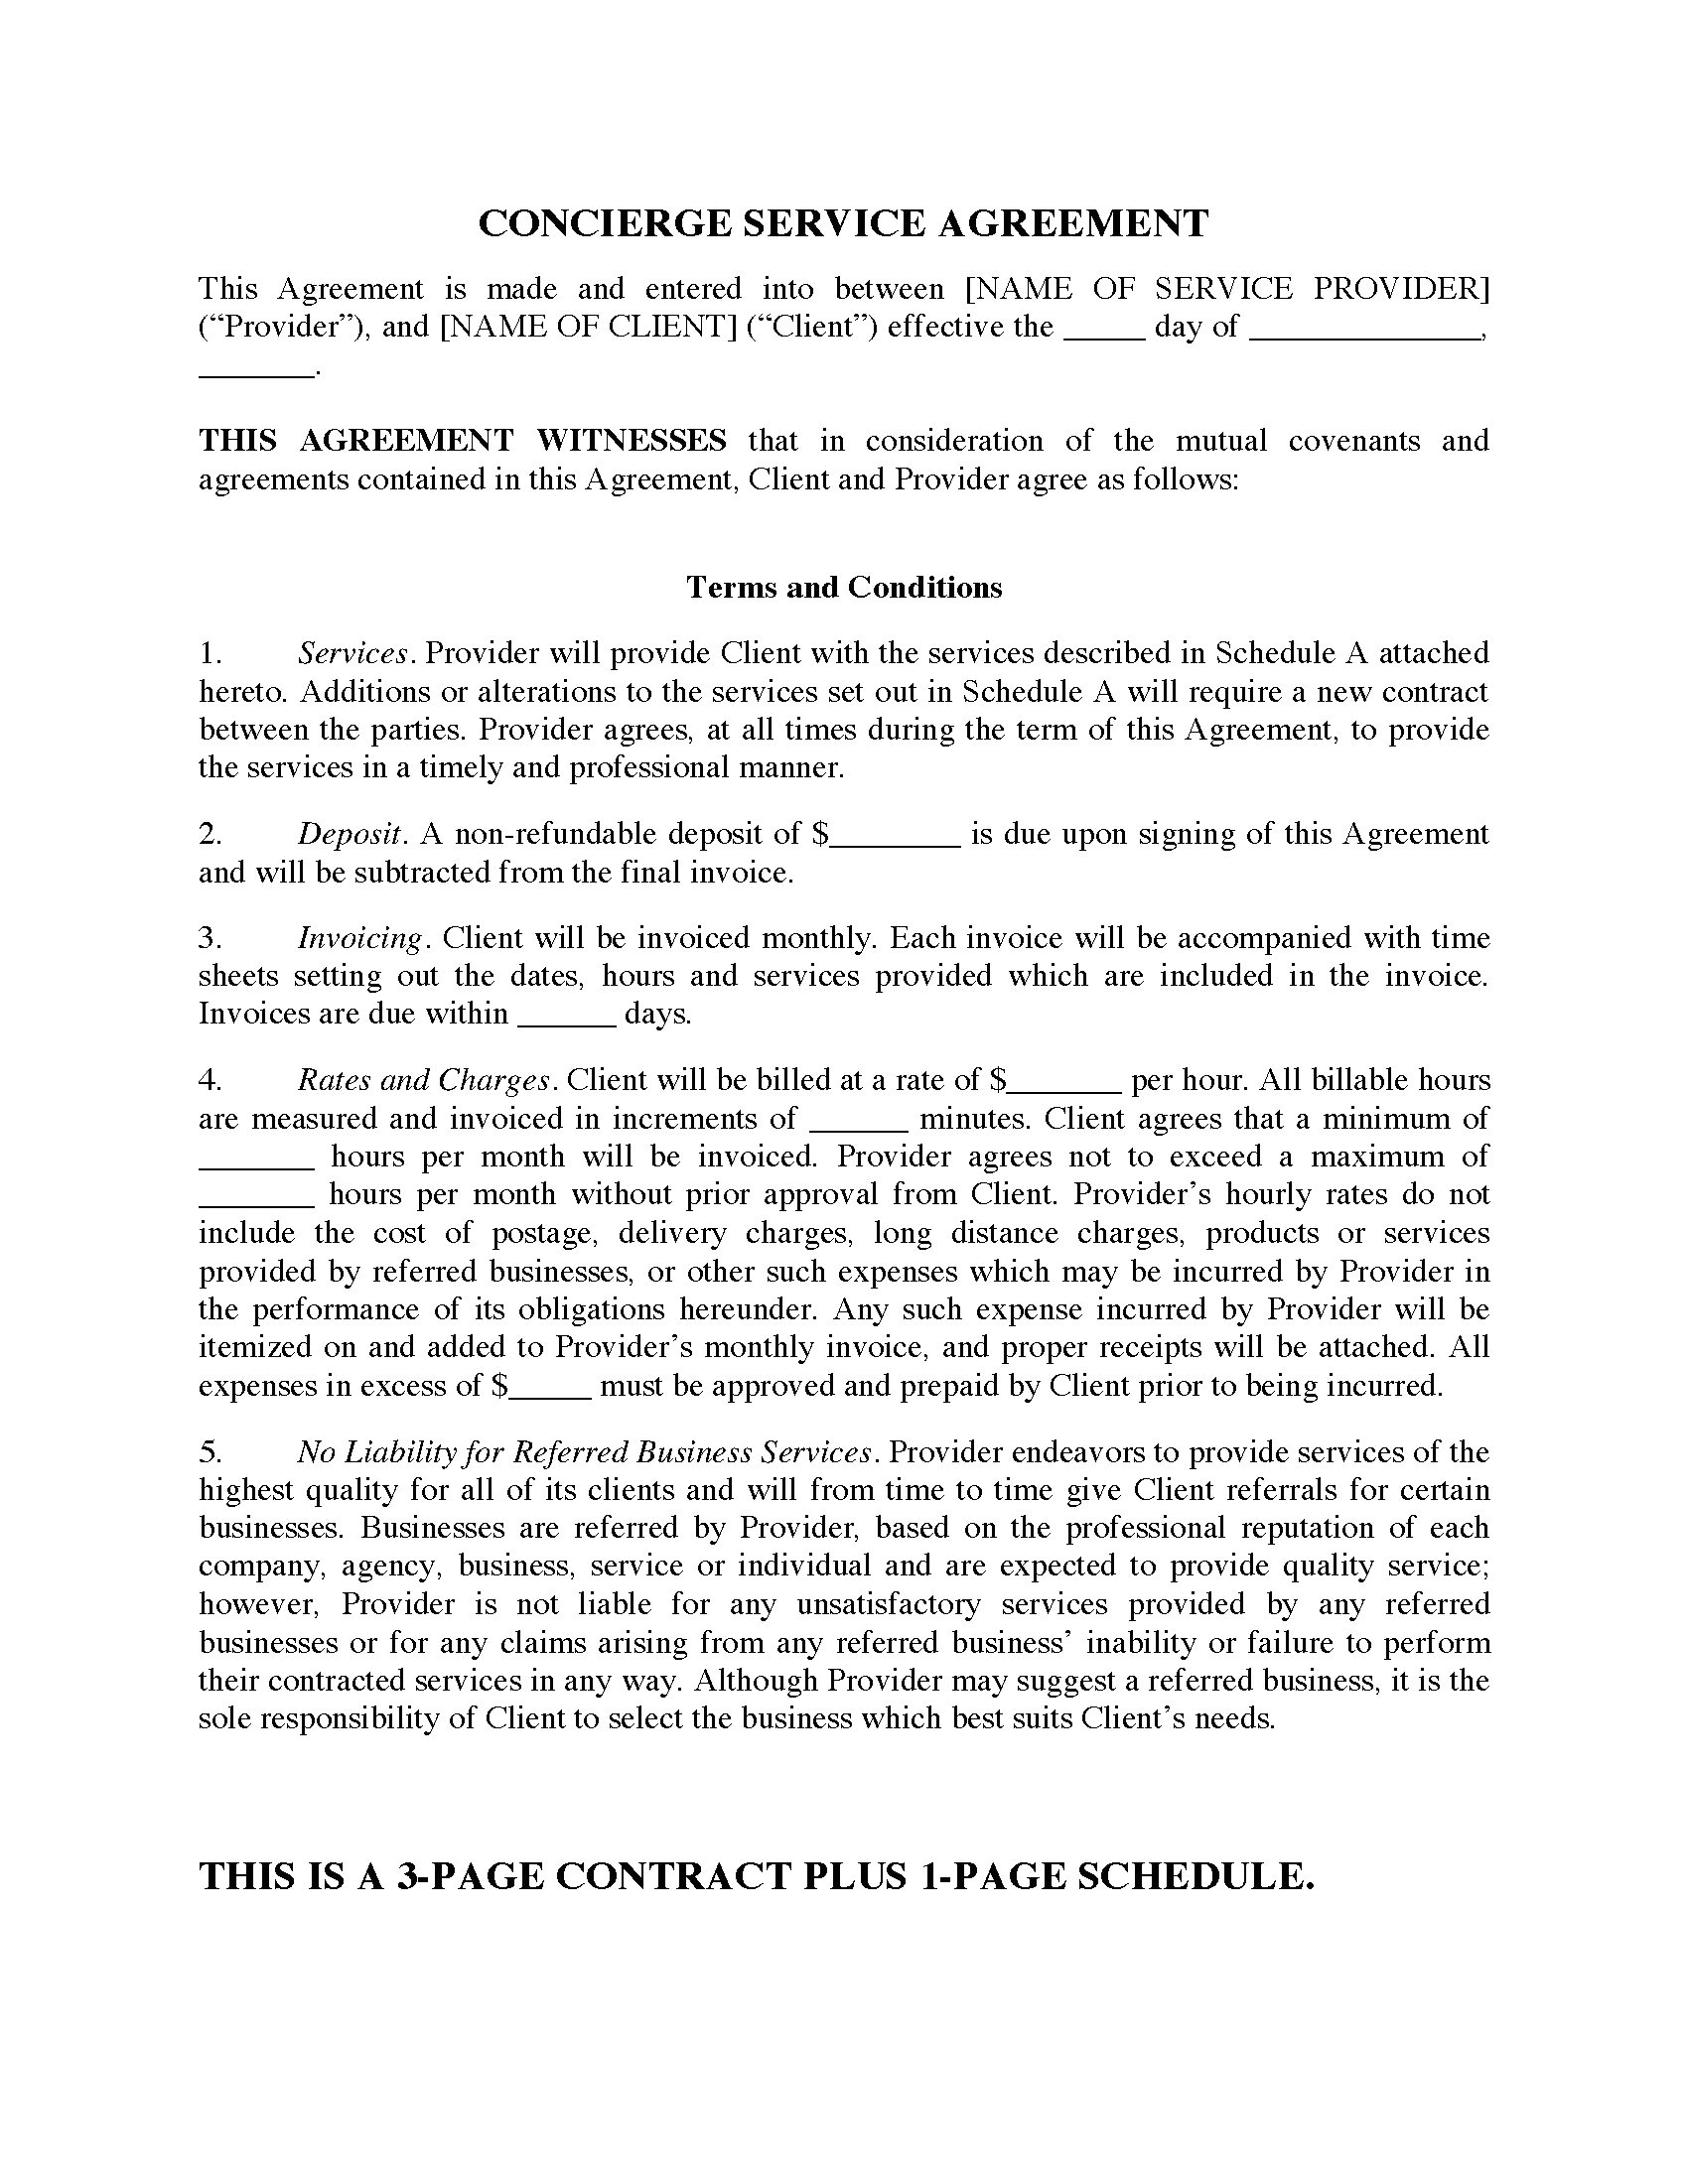 Concierge Contract Template Concierge Services Contract form Legal forms and